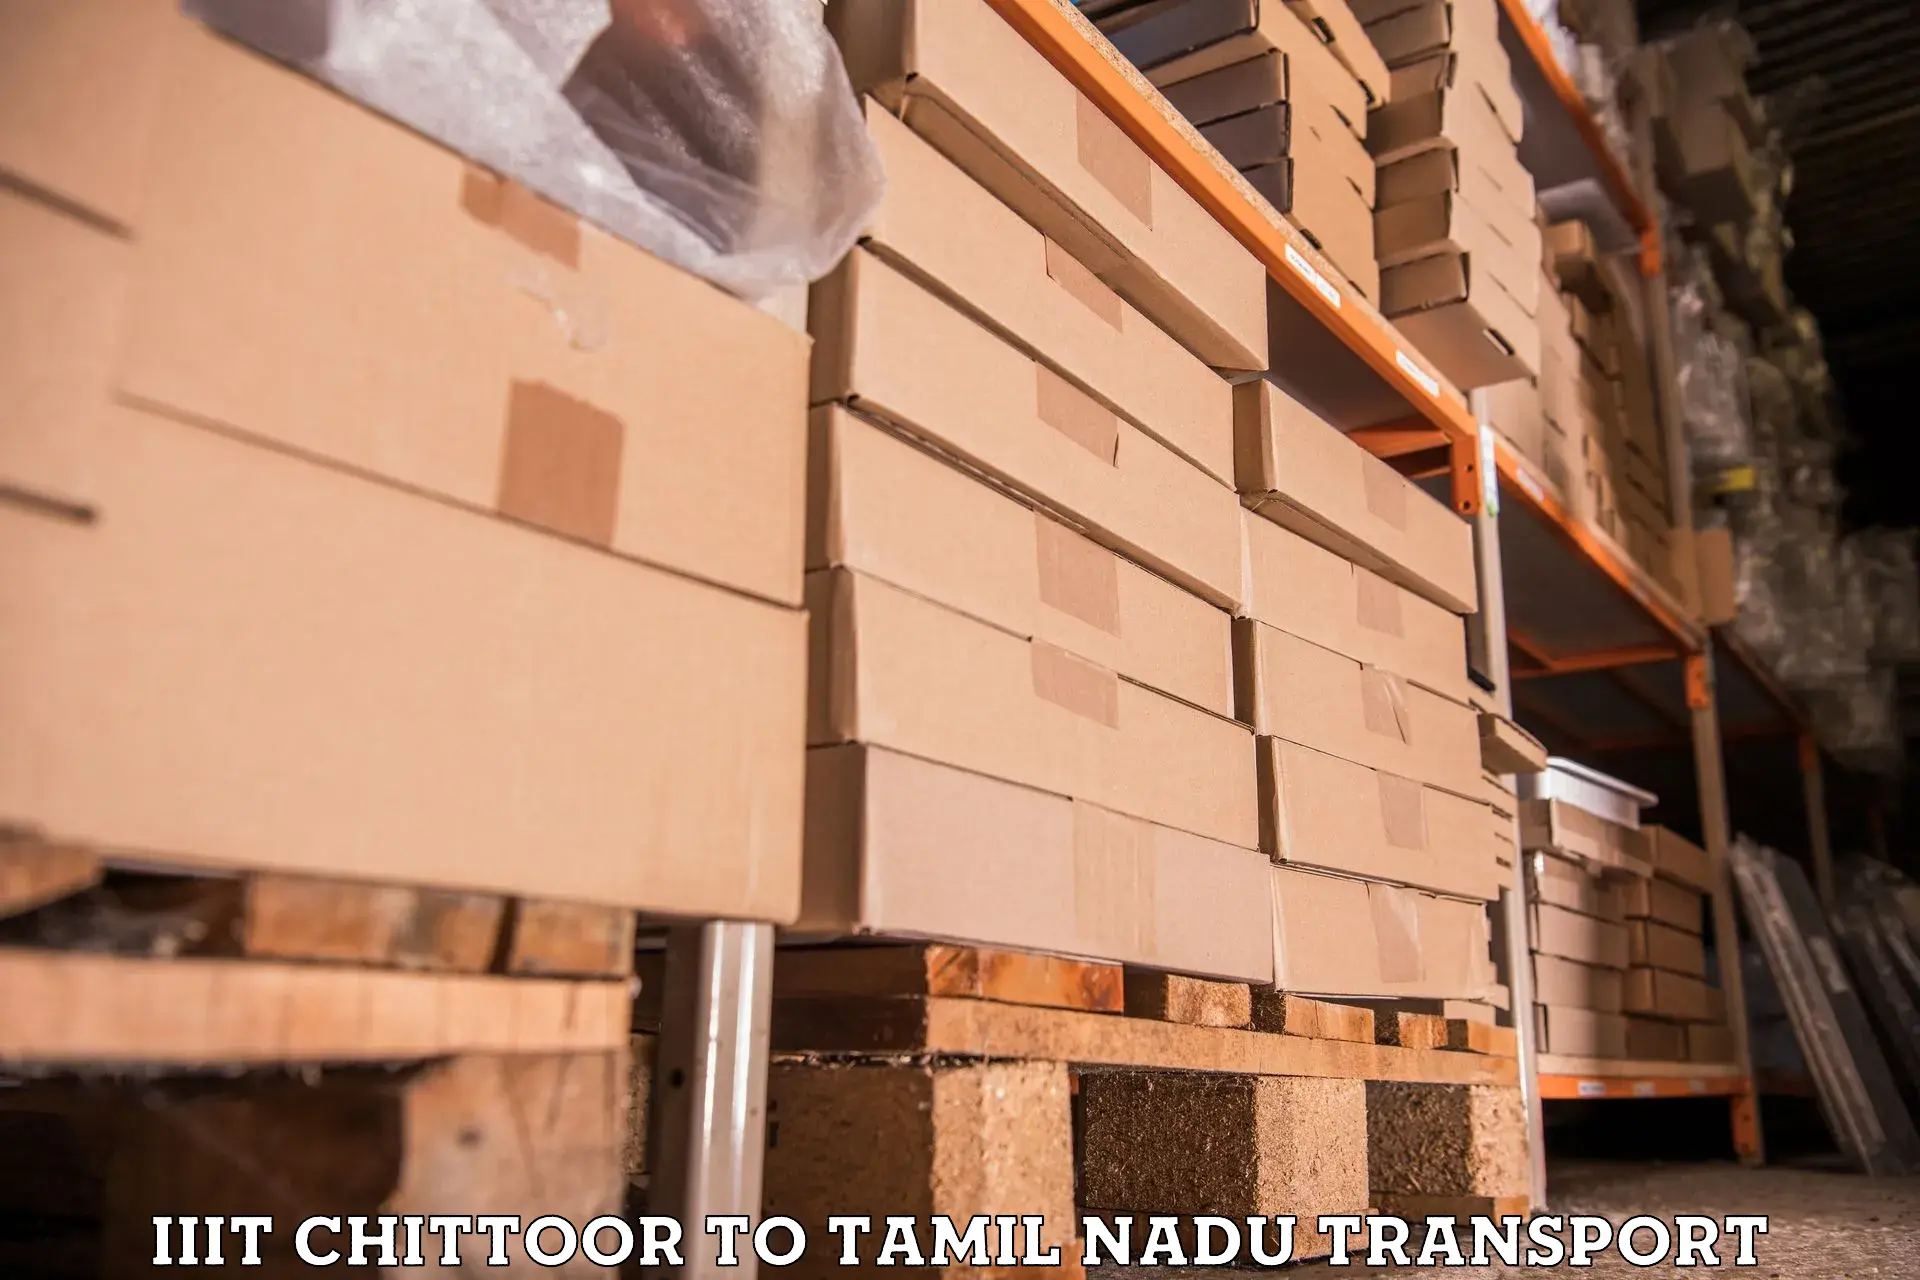 Daily parcel service transport IIIT Chittoor to Perambalur